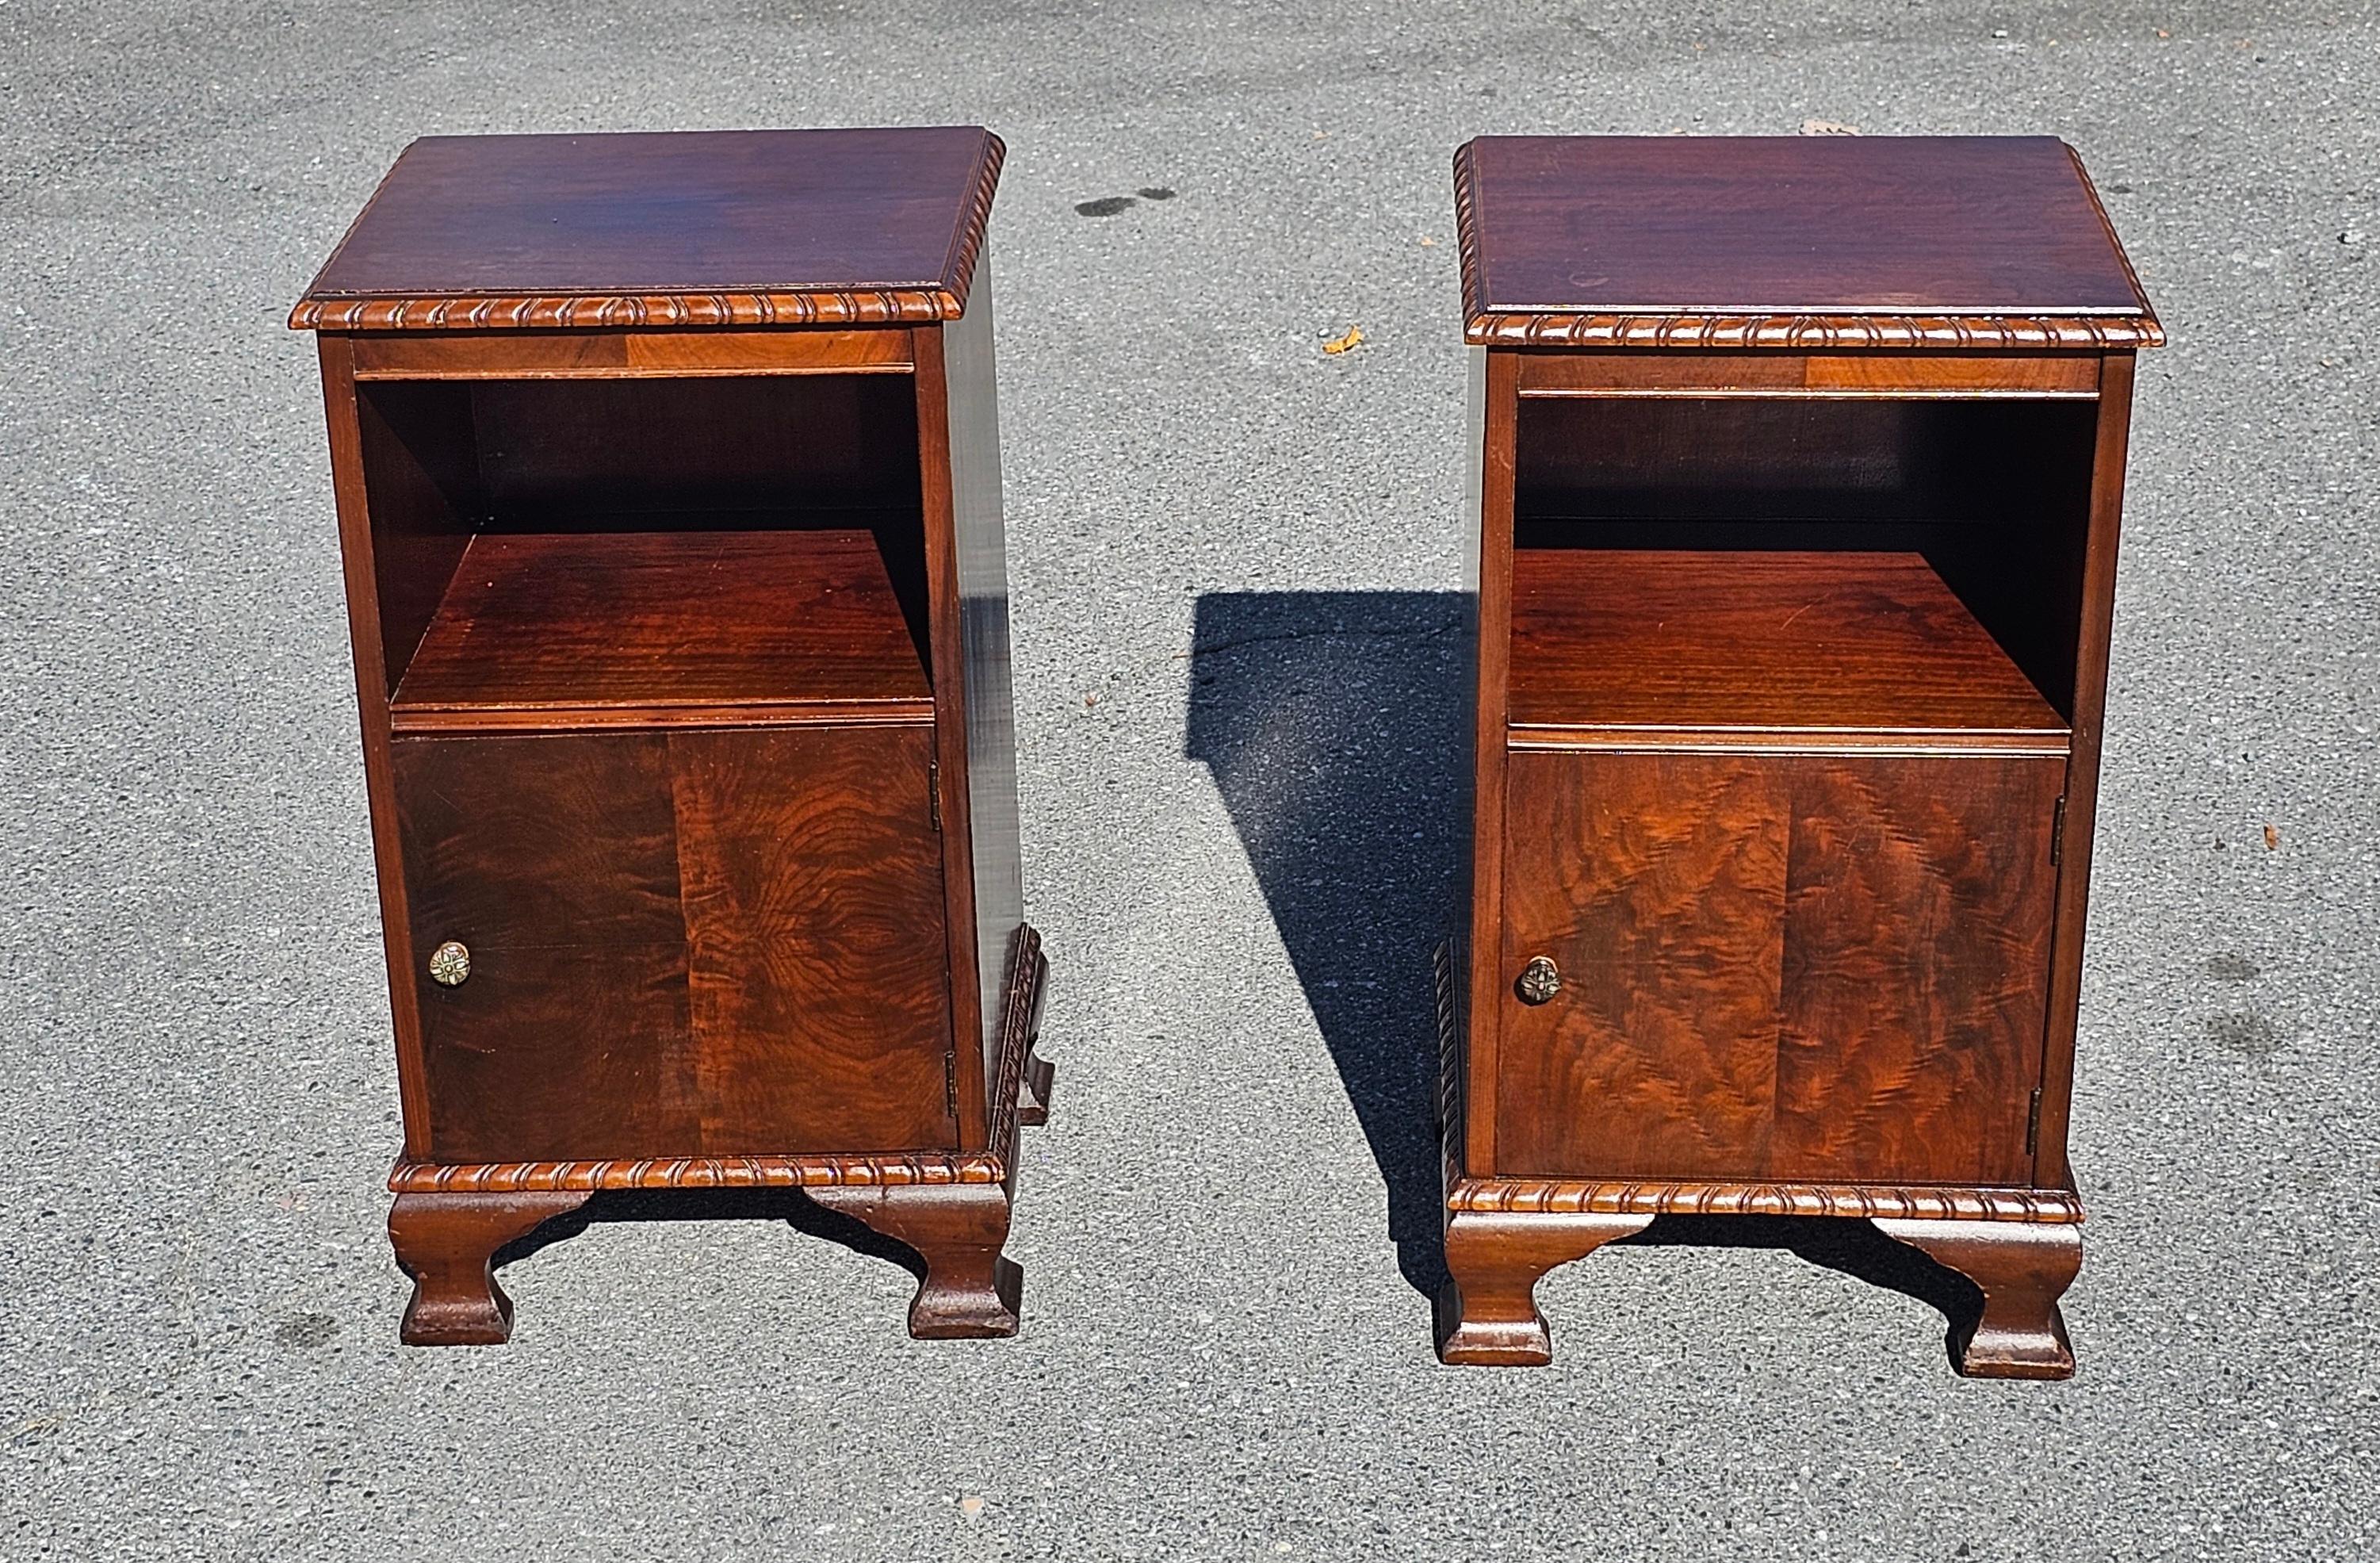 A Pair of Mid Century Walnut Burl Bedside Tables / Cabinets. Measure 16.25